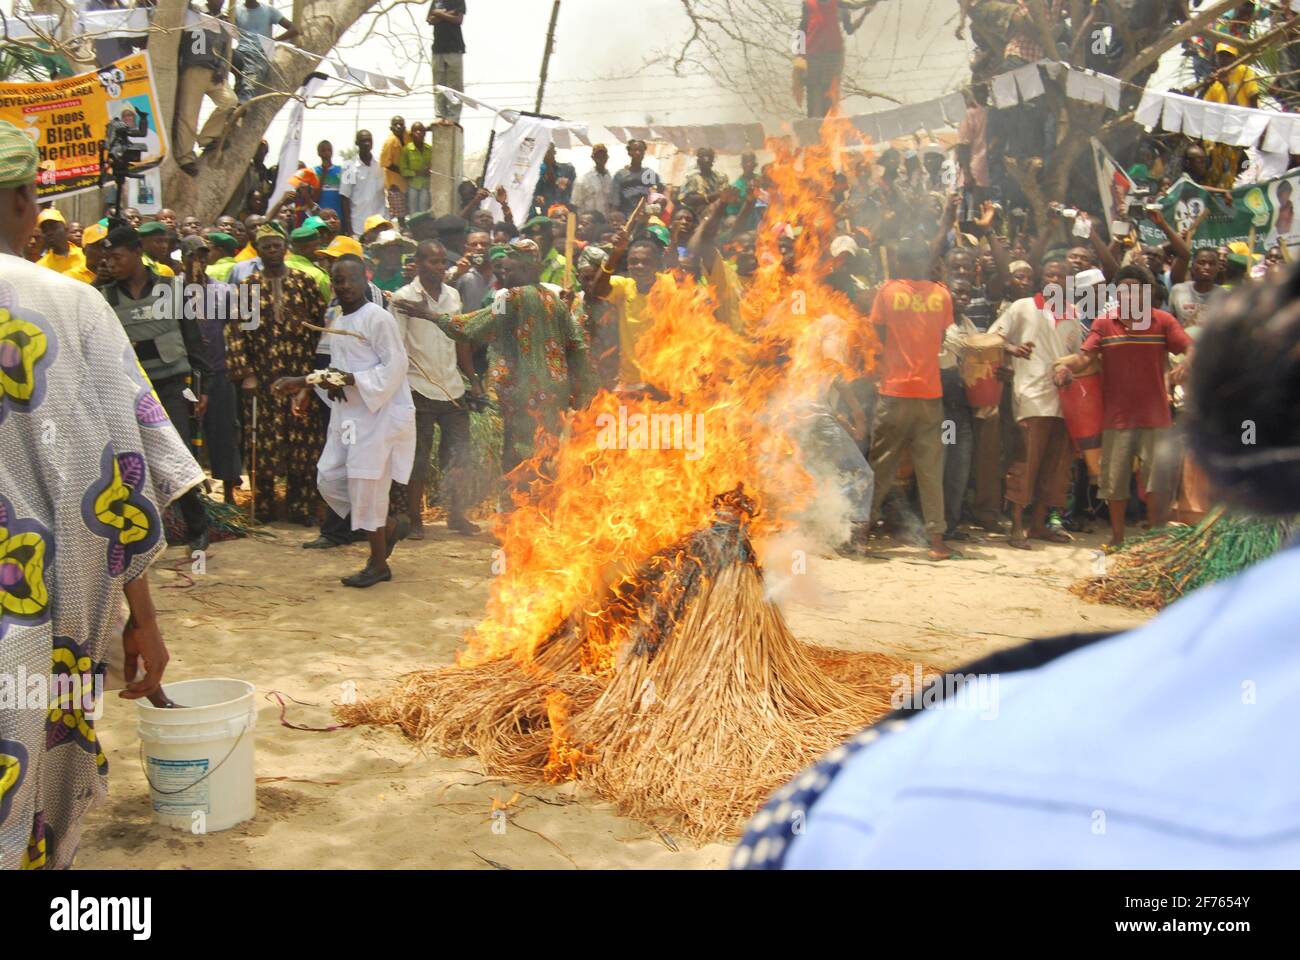 A man burning Zenbgeto Masquerade to showcase Africans Magical Power at the Annual Black Heritage Festival, Badagry, Lagos Nigeria. Stock Photo